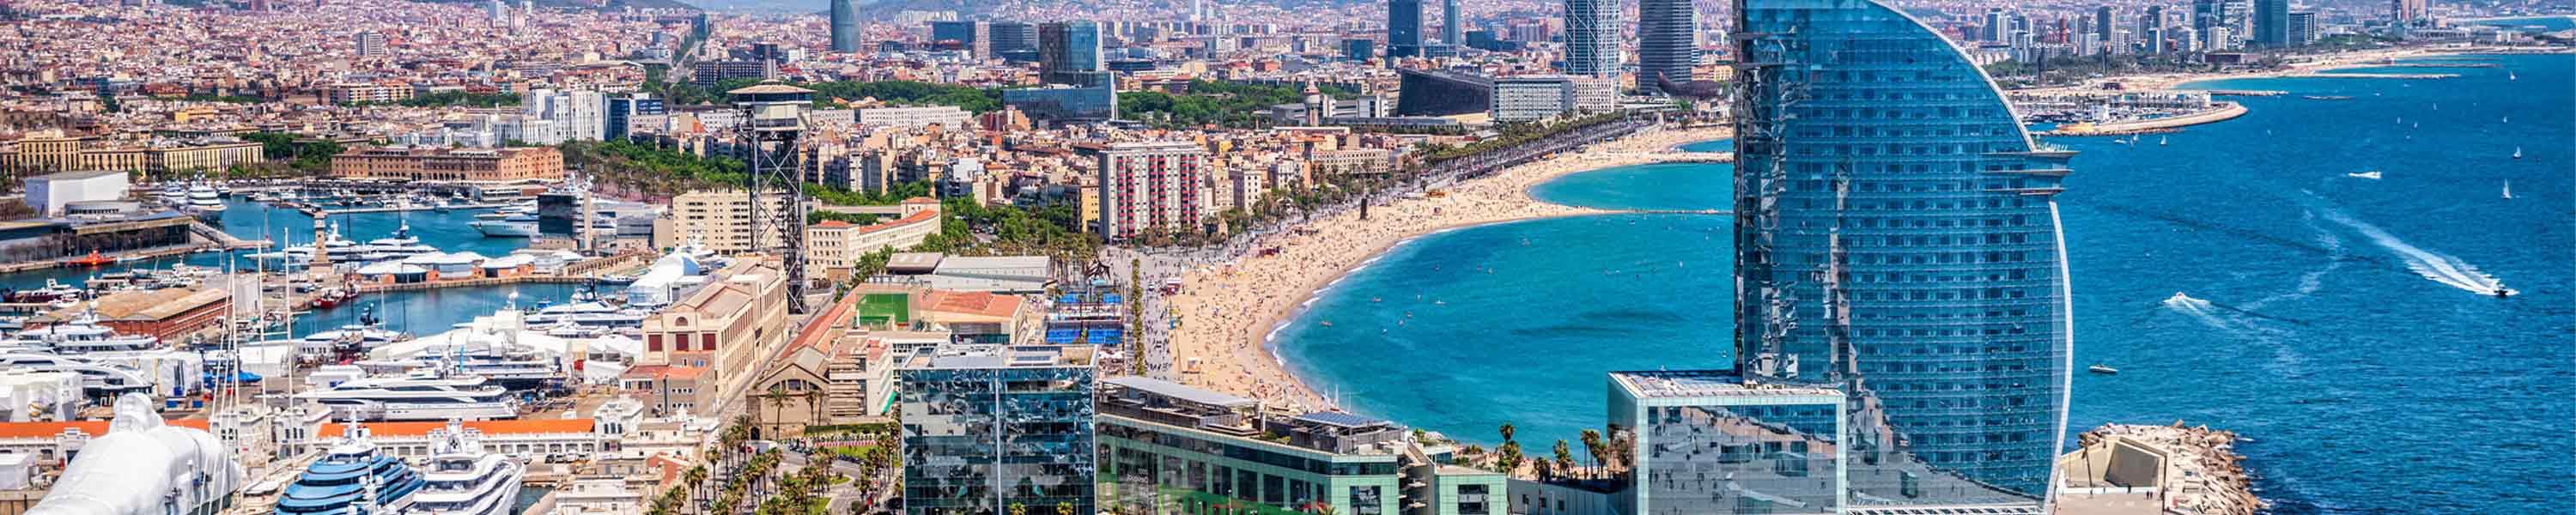 Aerial view of Port Vell, Barcelona, Catalonia, Spain